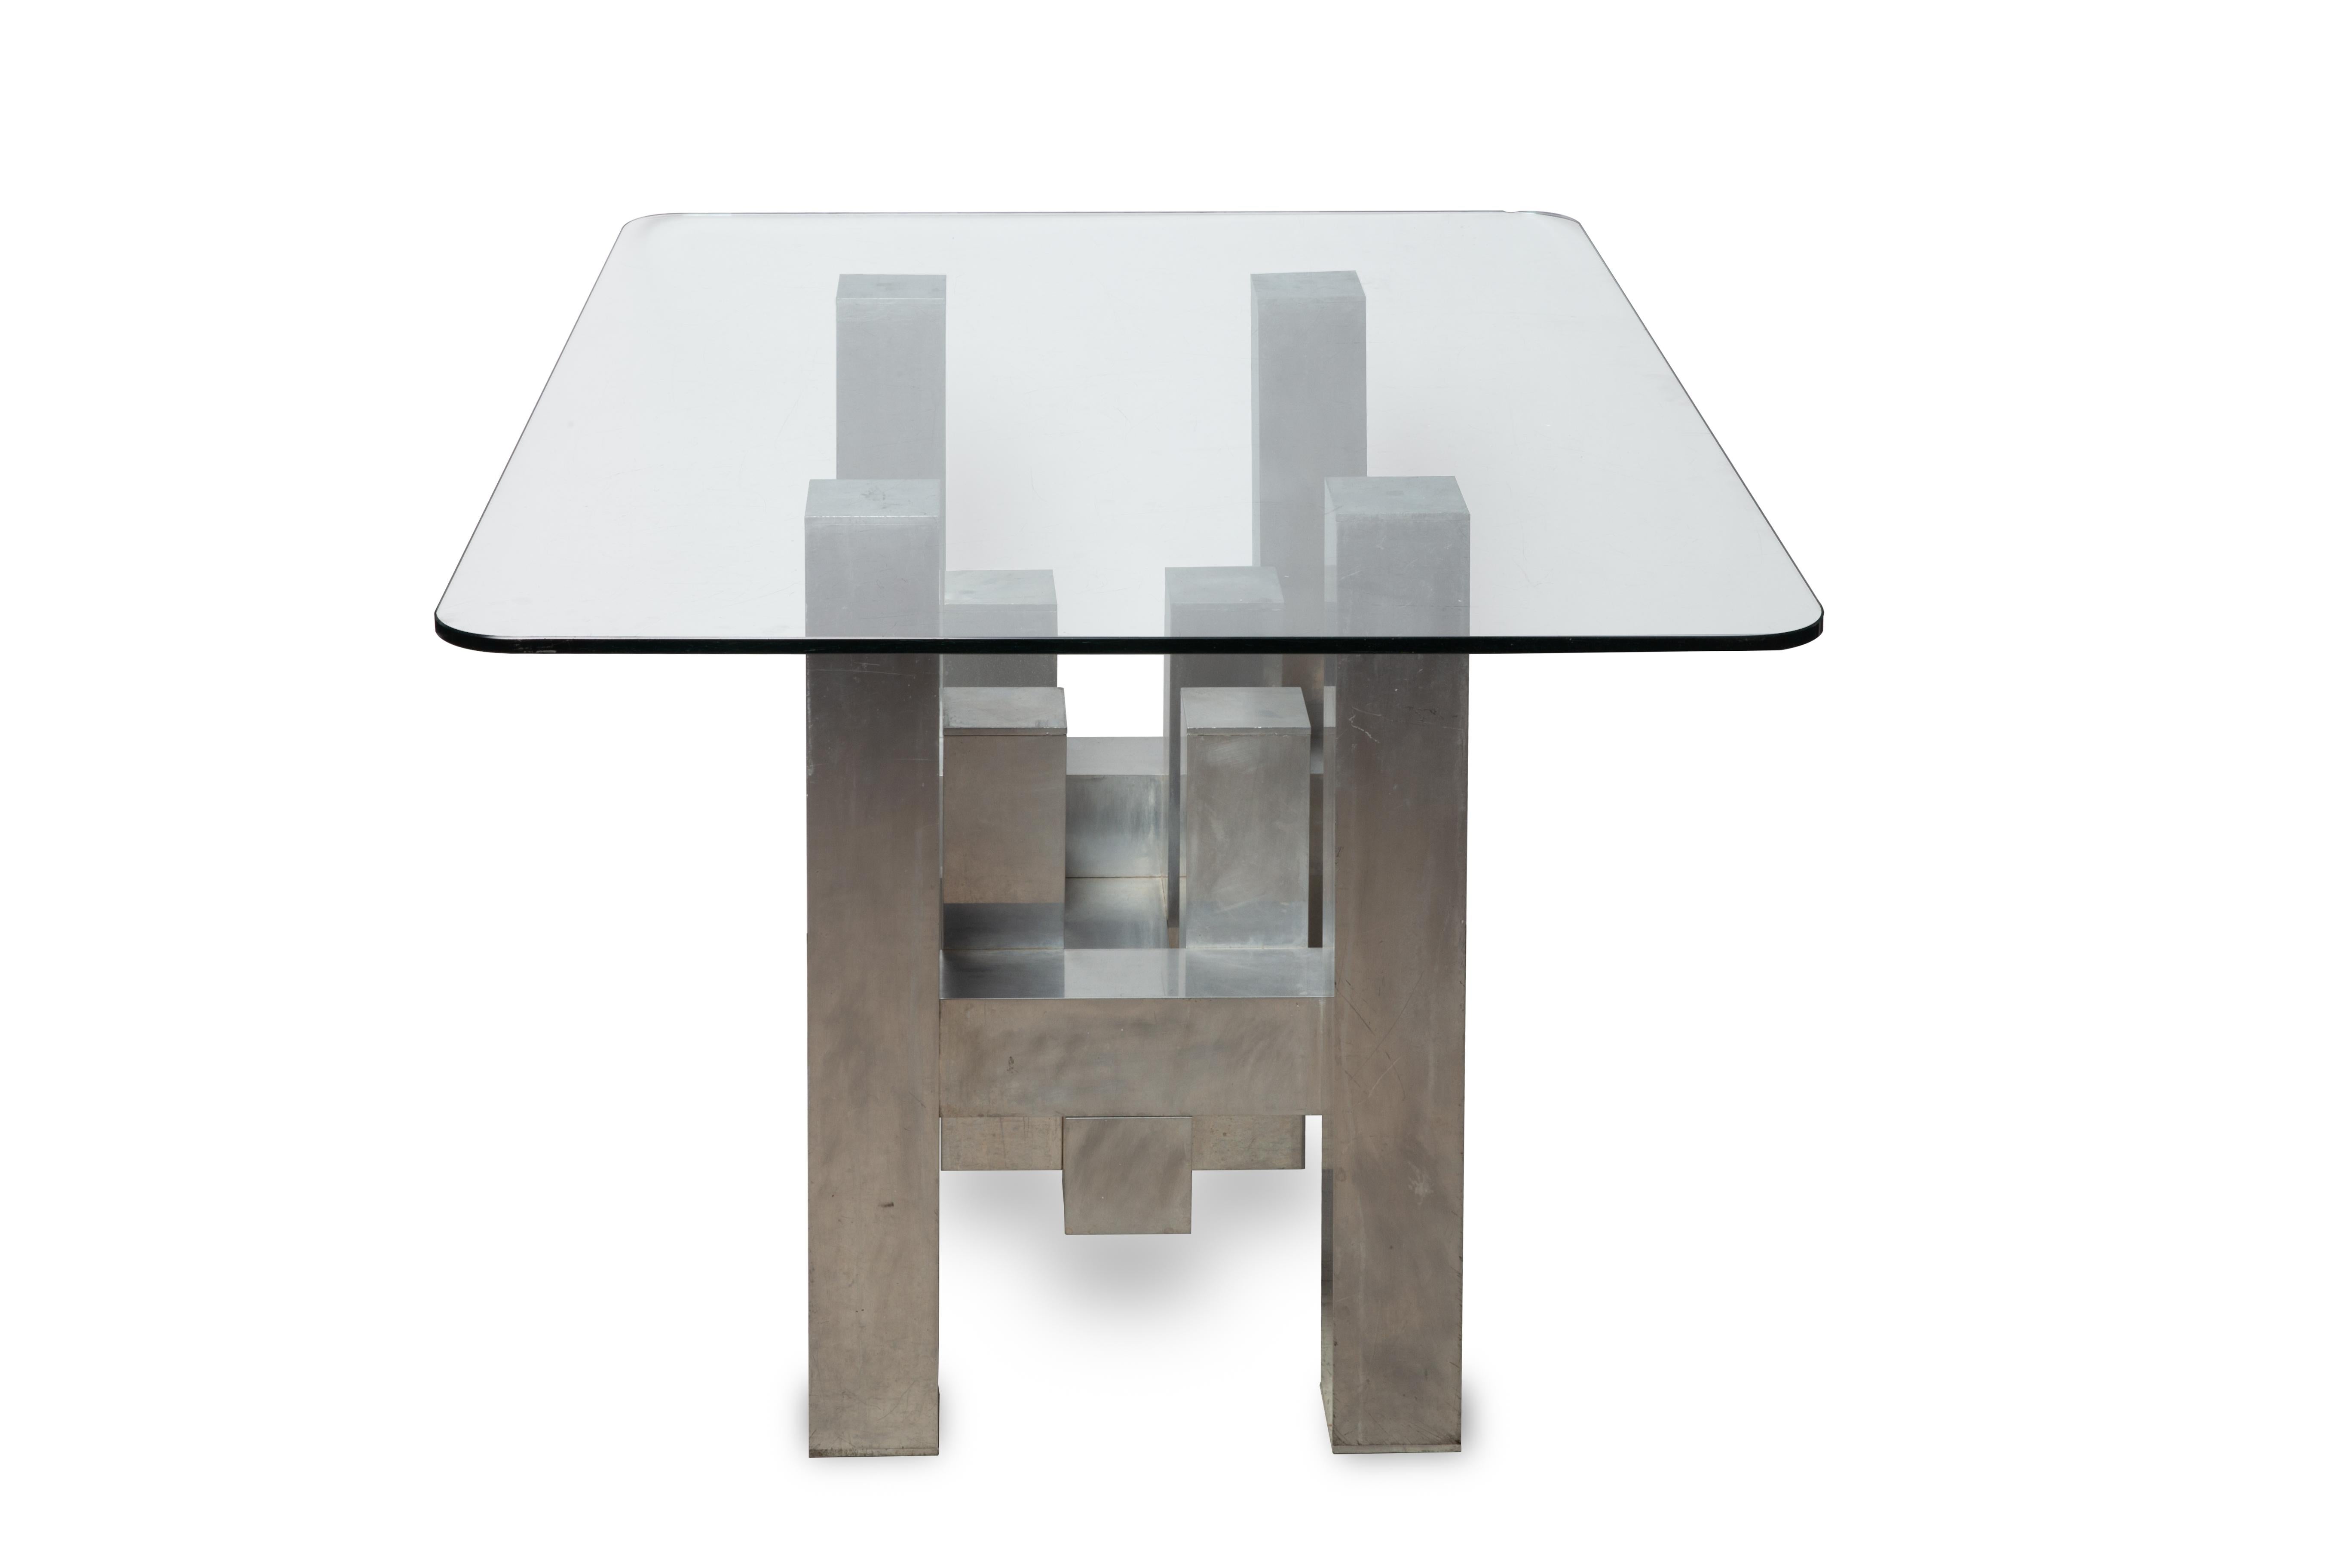 The Mid-Century Modern Paul Skyscraper aka Cityscape table designed for Habitat is one of his best designs. Its as much a sculpture as it is a functional table. I have seen the base placed on its side as well as in the position we chose upside down,